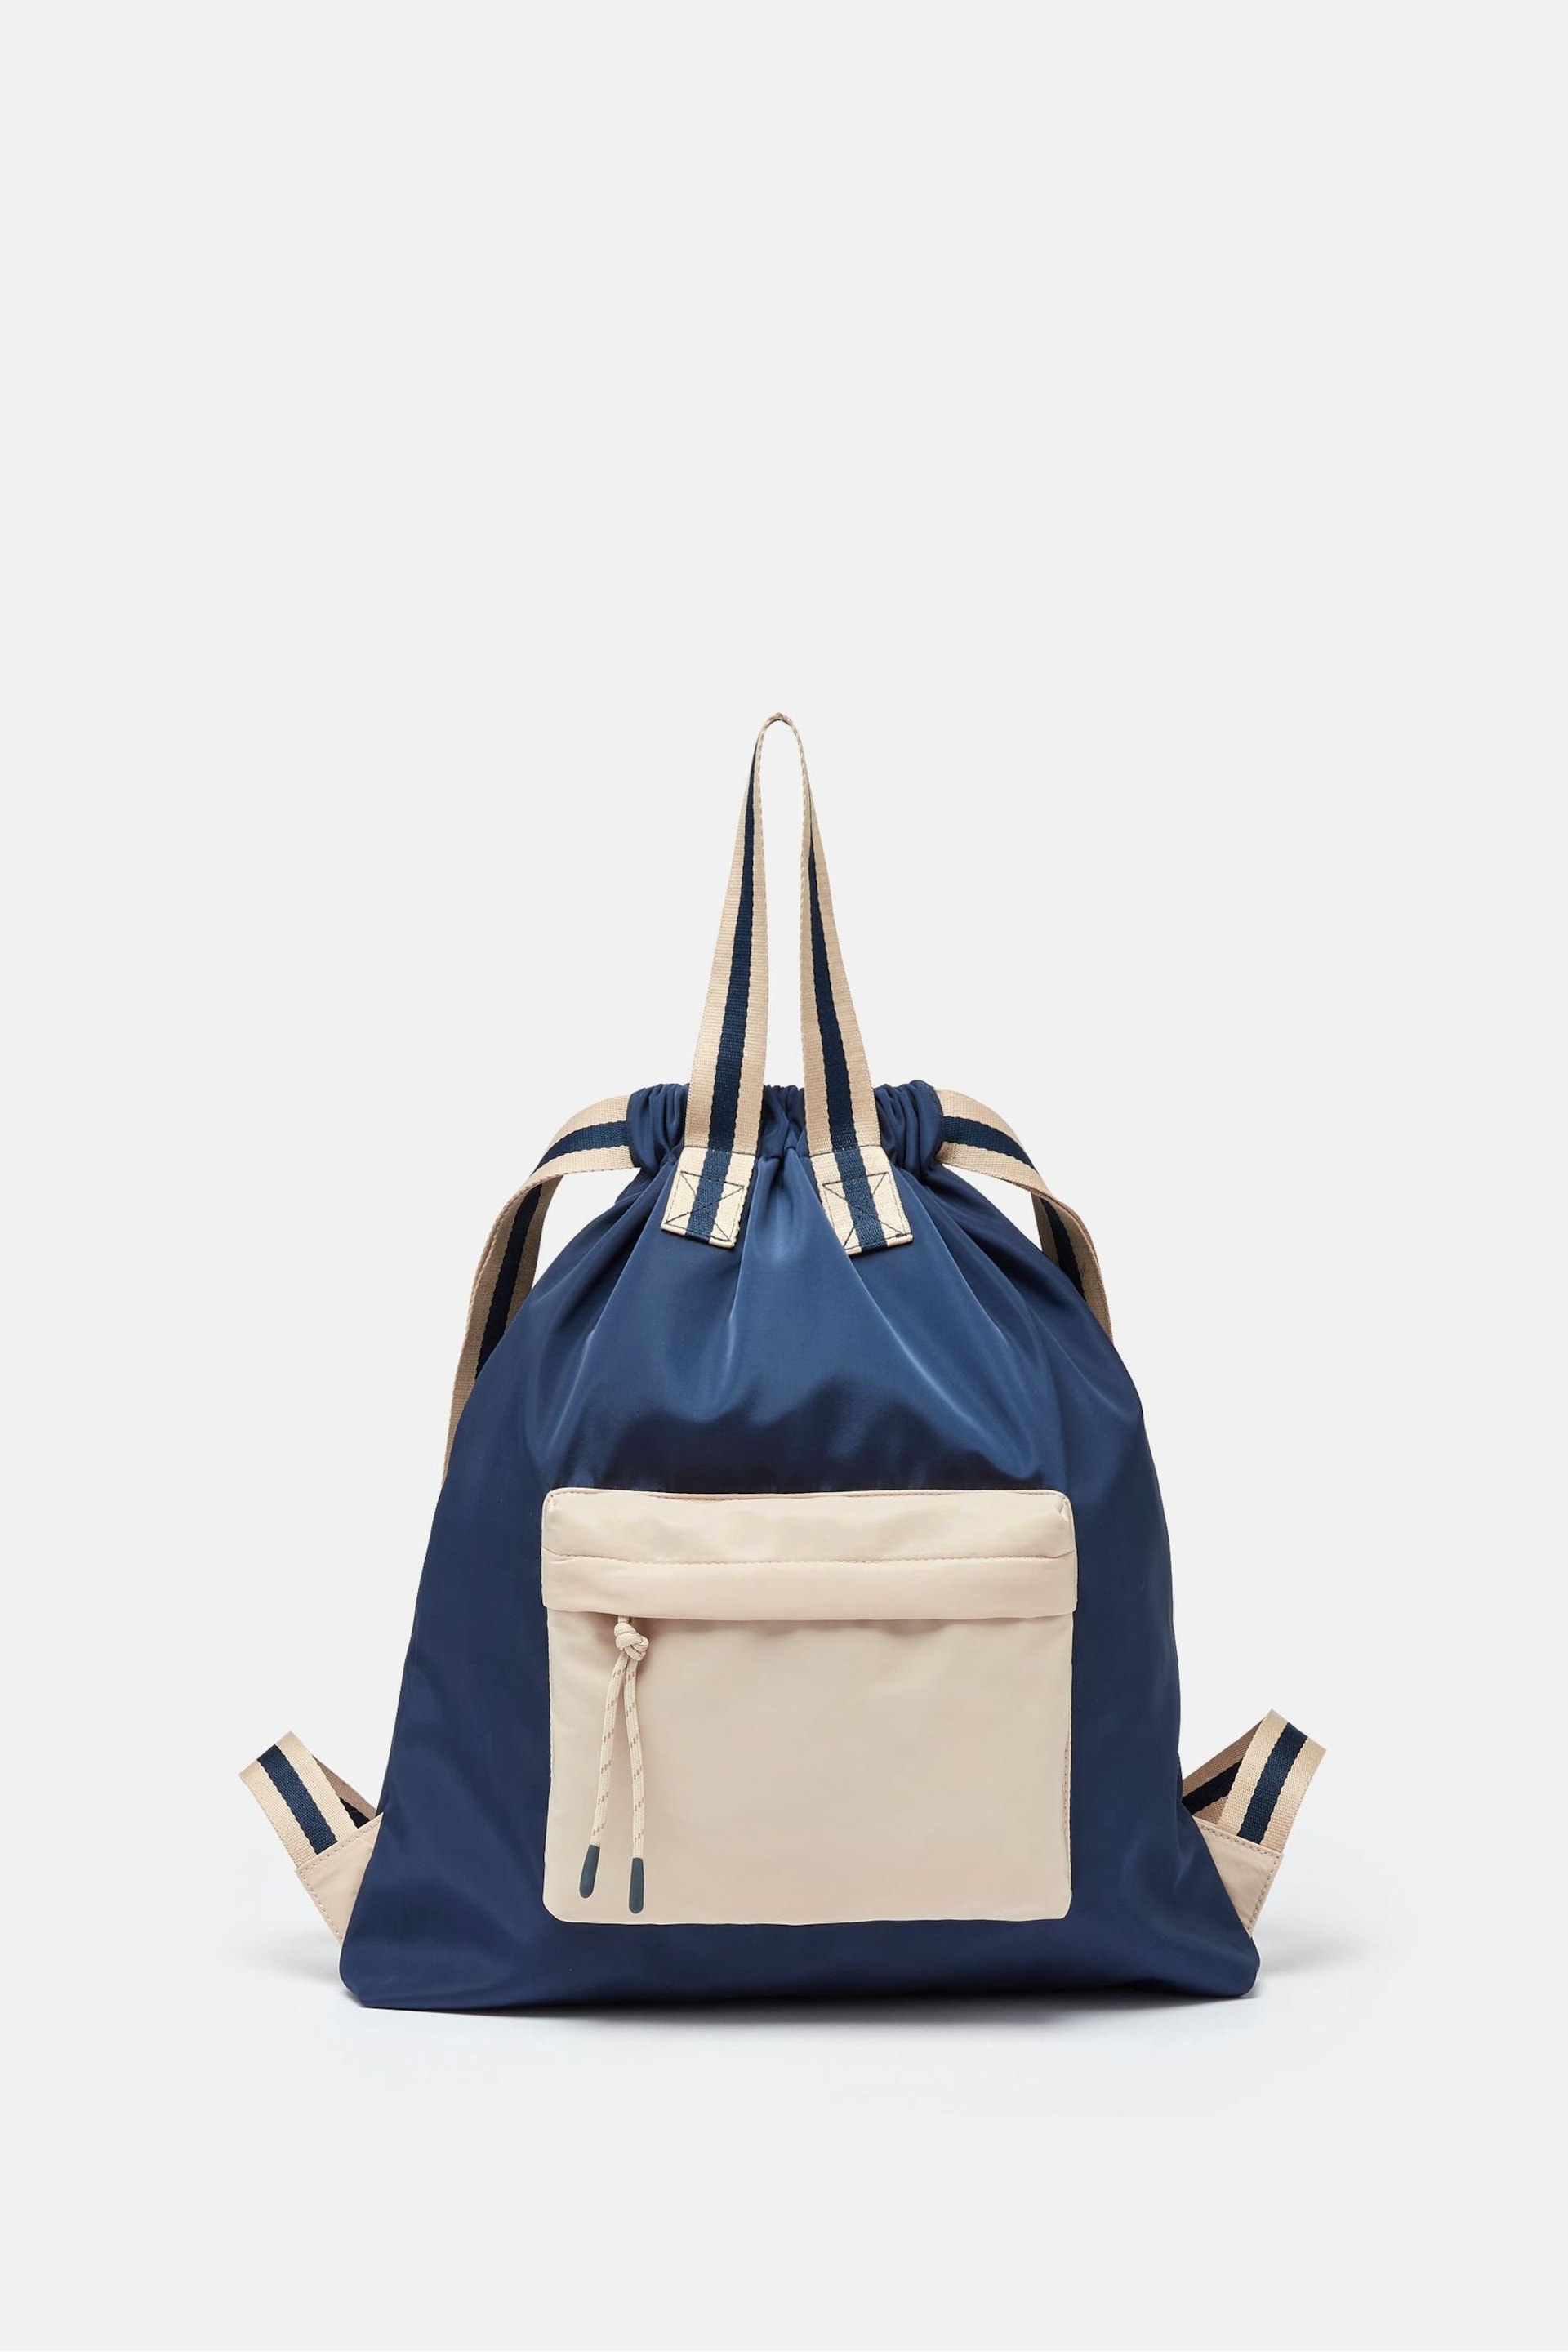 Joules Packwell Navy Colour Block Rucksack - Image 1 of 7